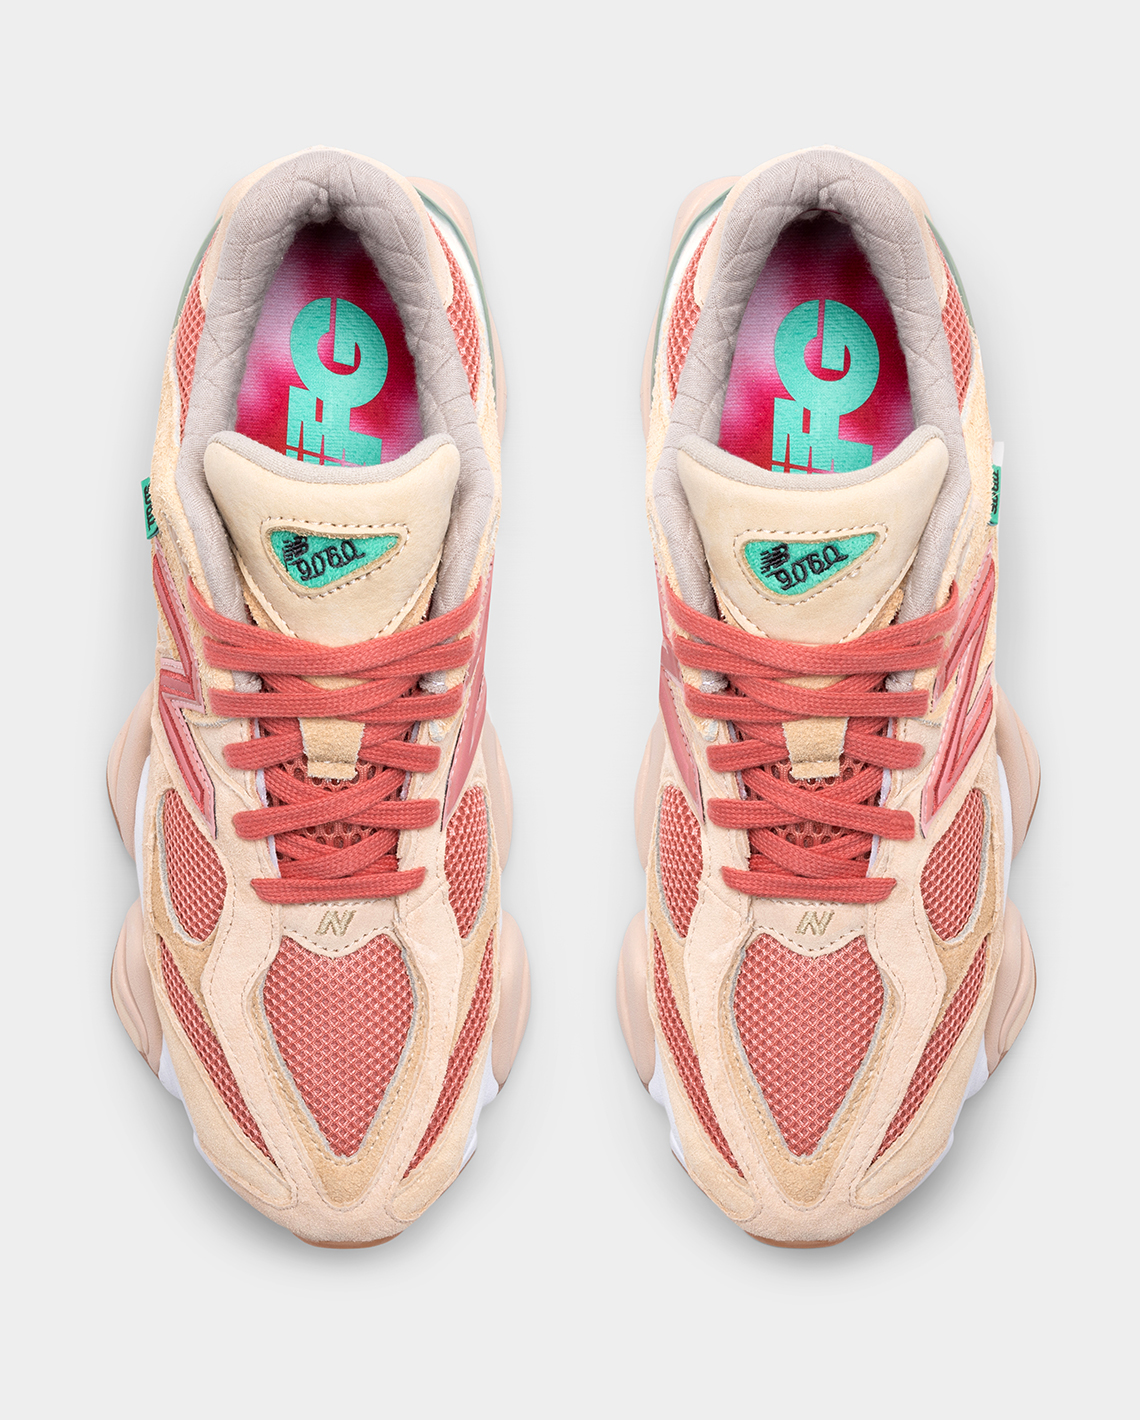 Joefreshgoods New Balance Athletics Wind Short MS21500BK Penny Cookie Pink Release Date 4